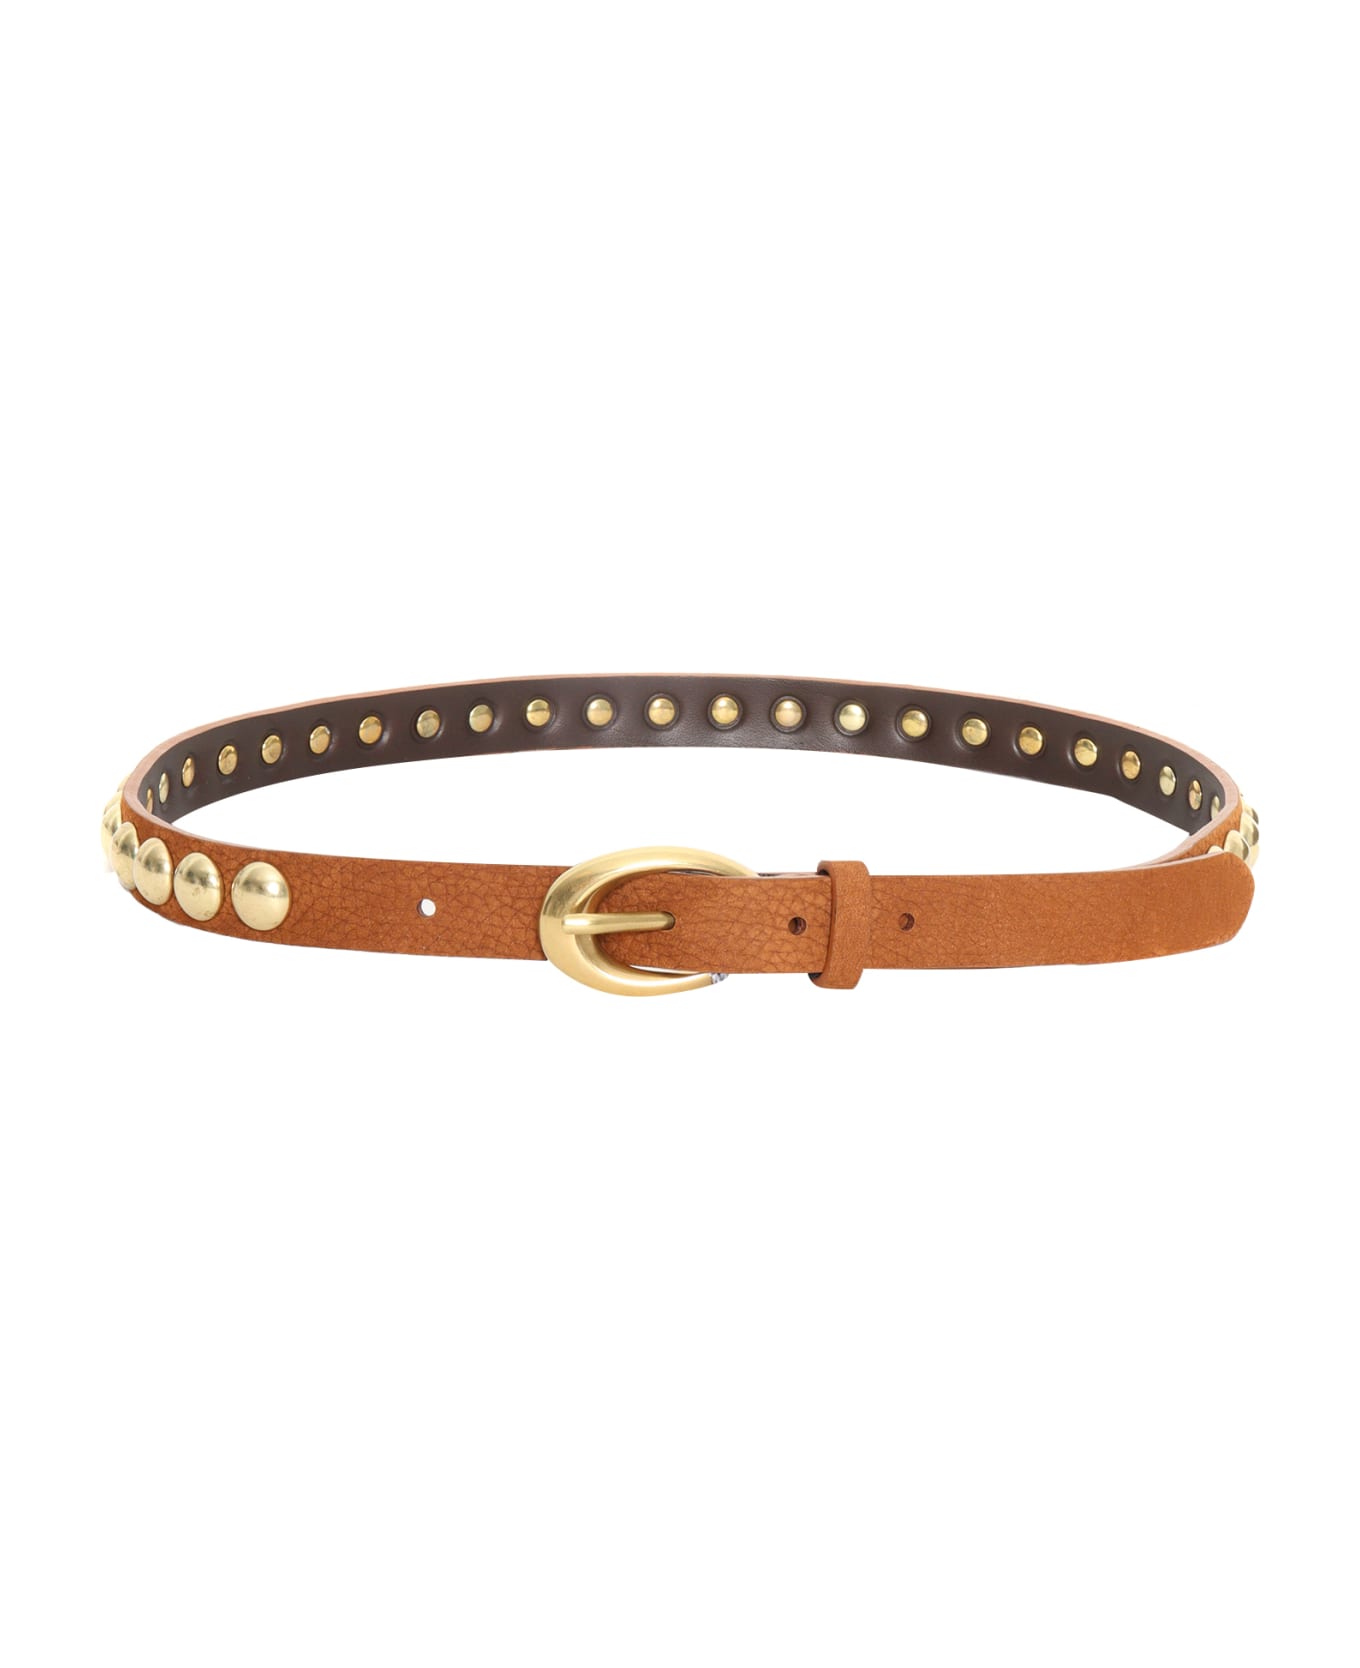 Orciani Studded Belt - BROWN